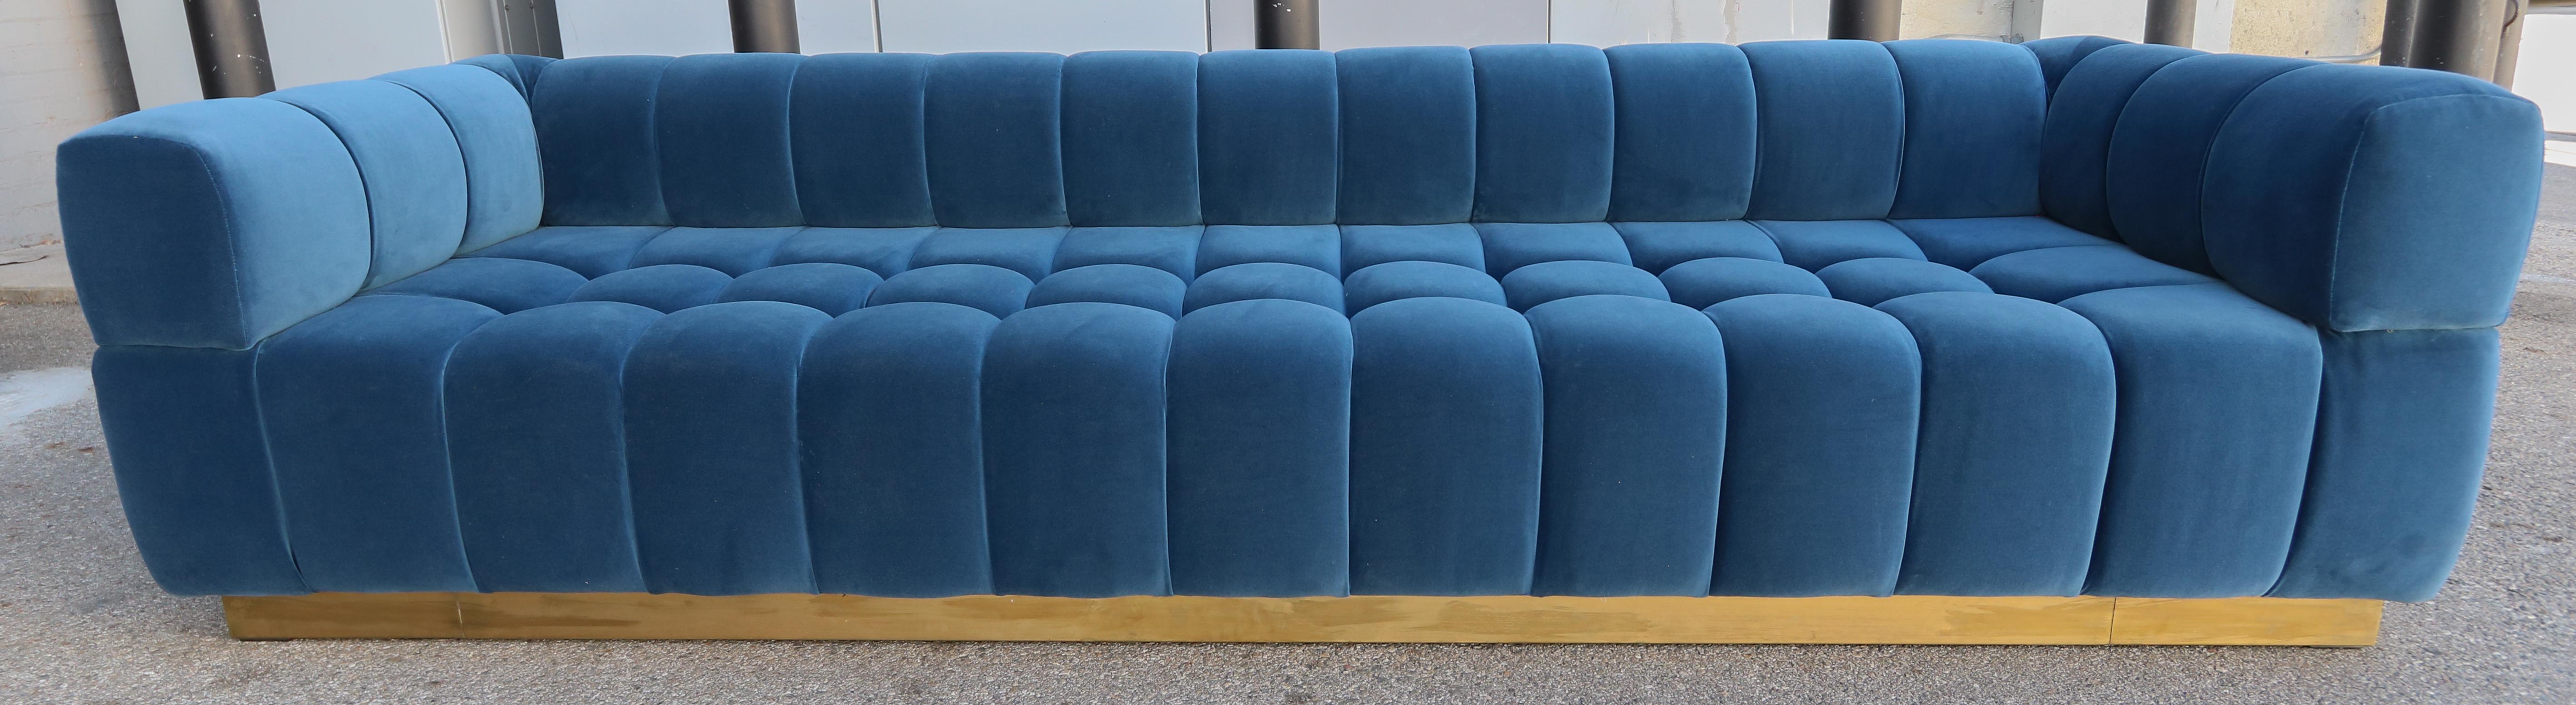 Contemporary Custom Tufted Blue Velvet Sofa with Brass Base by Adesso Imports For Sale